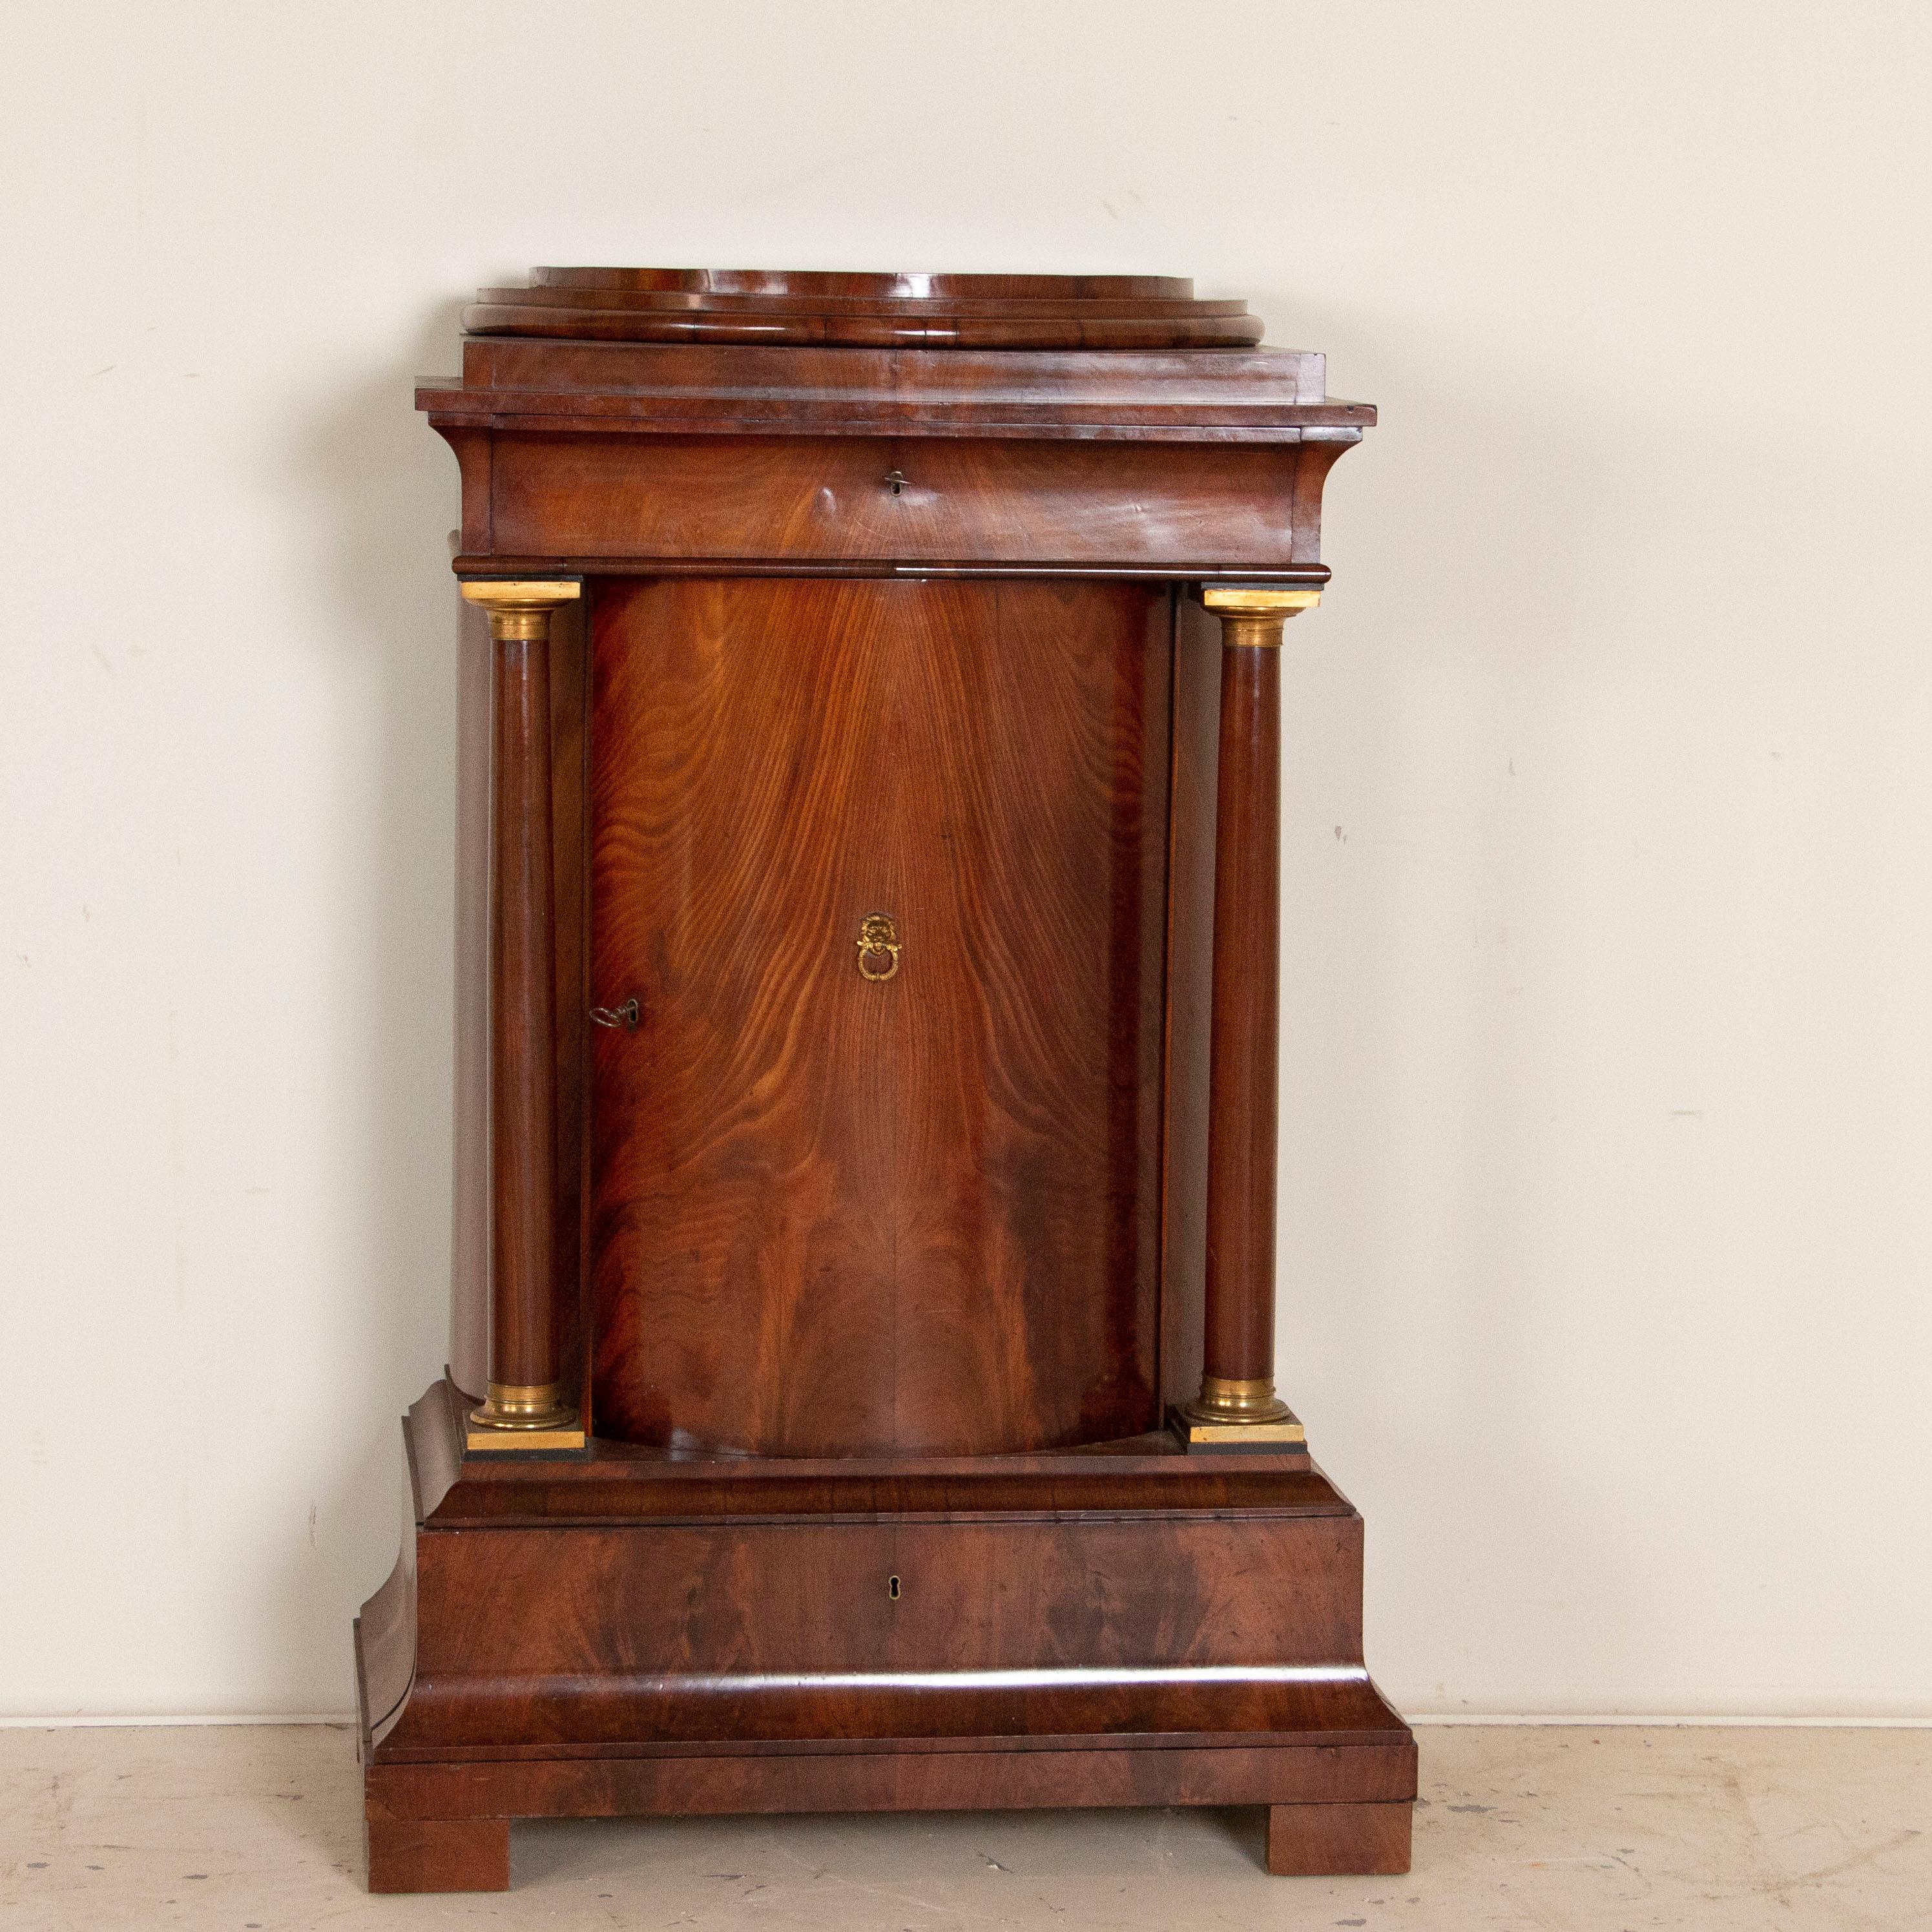 Stately and elegant, this mahogany cabinet reveals its Biedermeier style in the Classic columns, bronze accents and bowed/curved door, in addition to the striking finish of the rich mahogany. Designed as a pedestal cabinet by an exclusive craftsman,